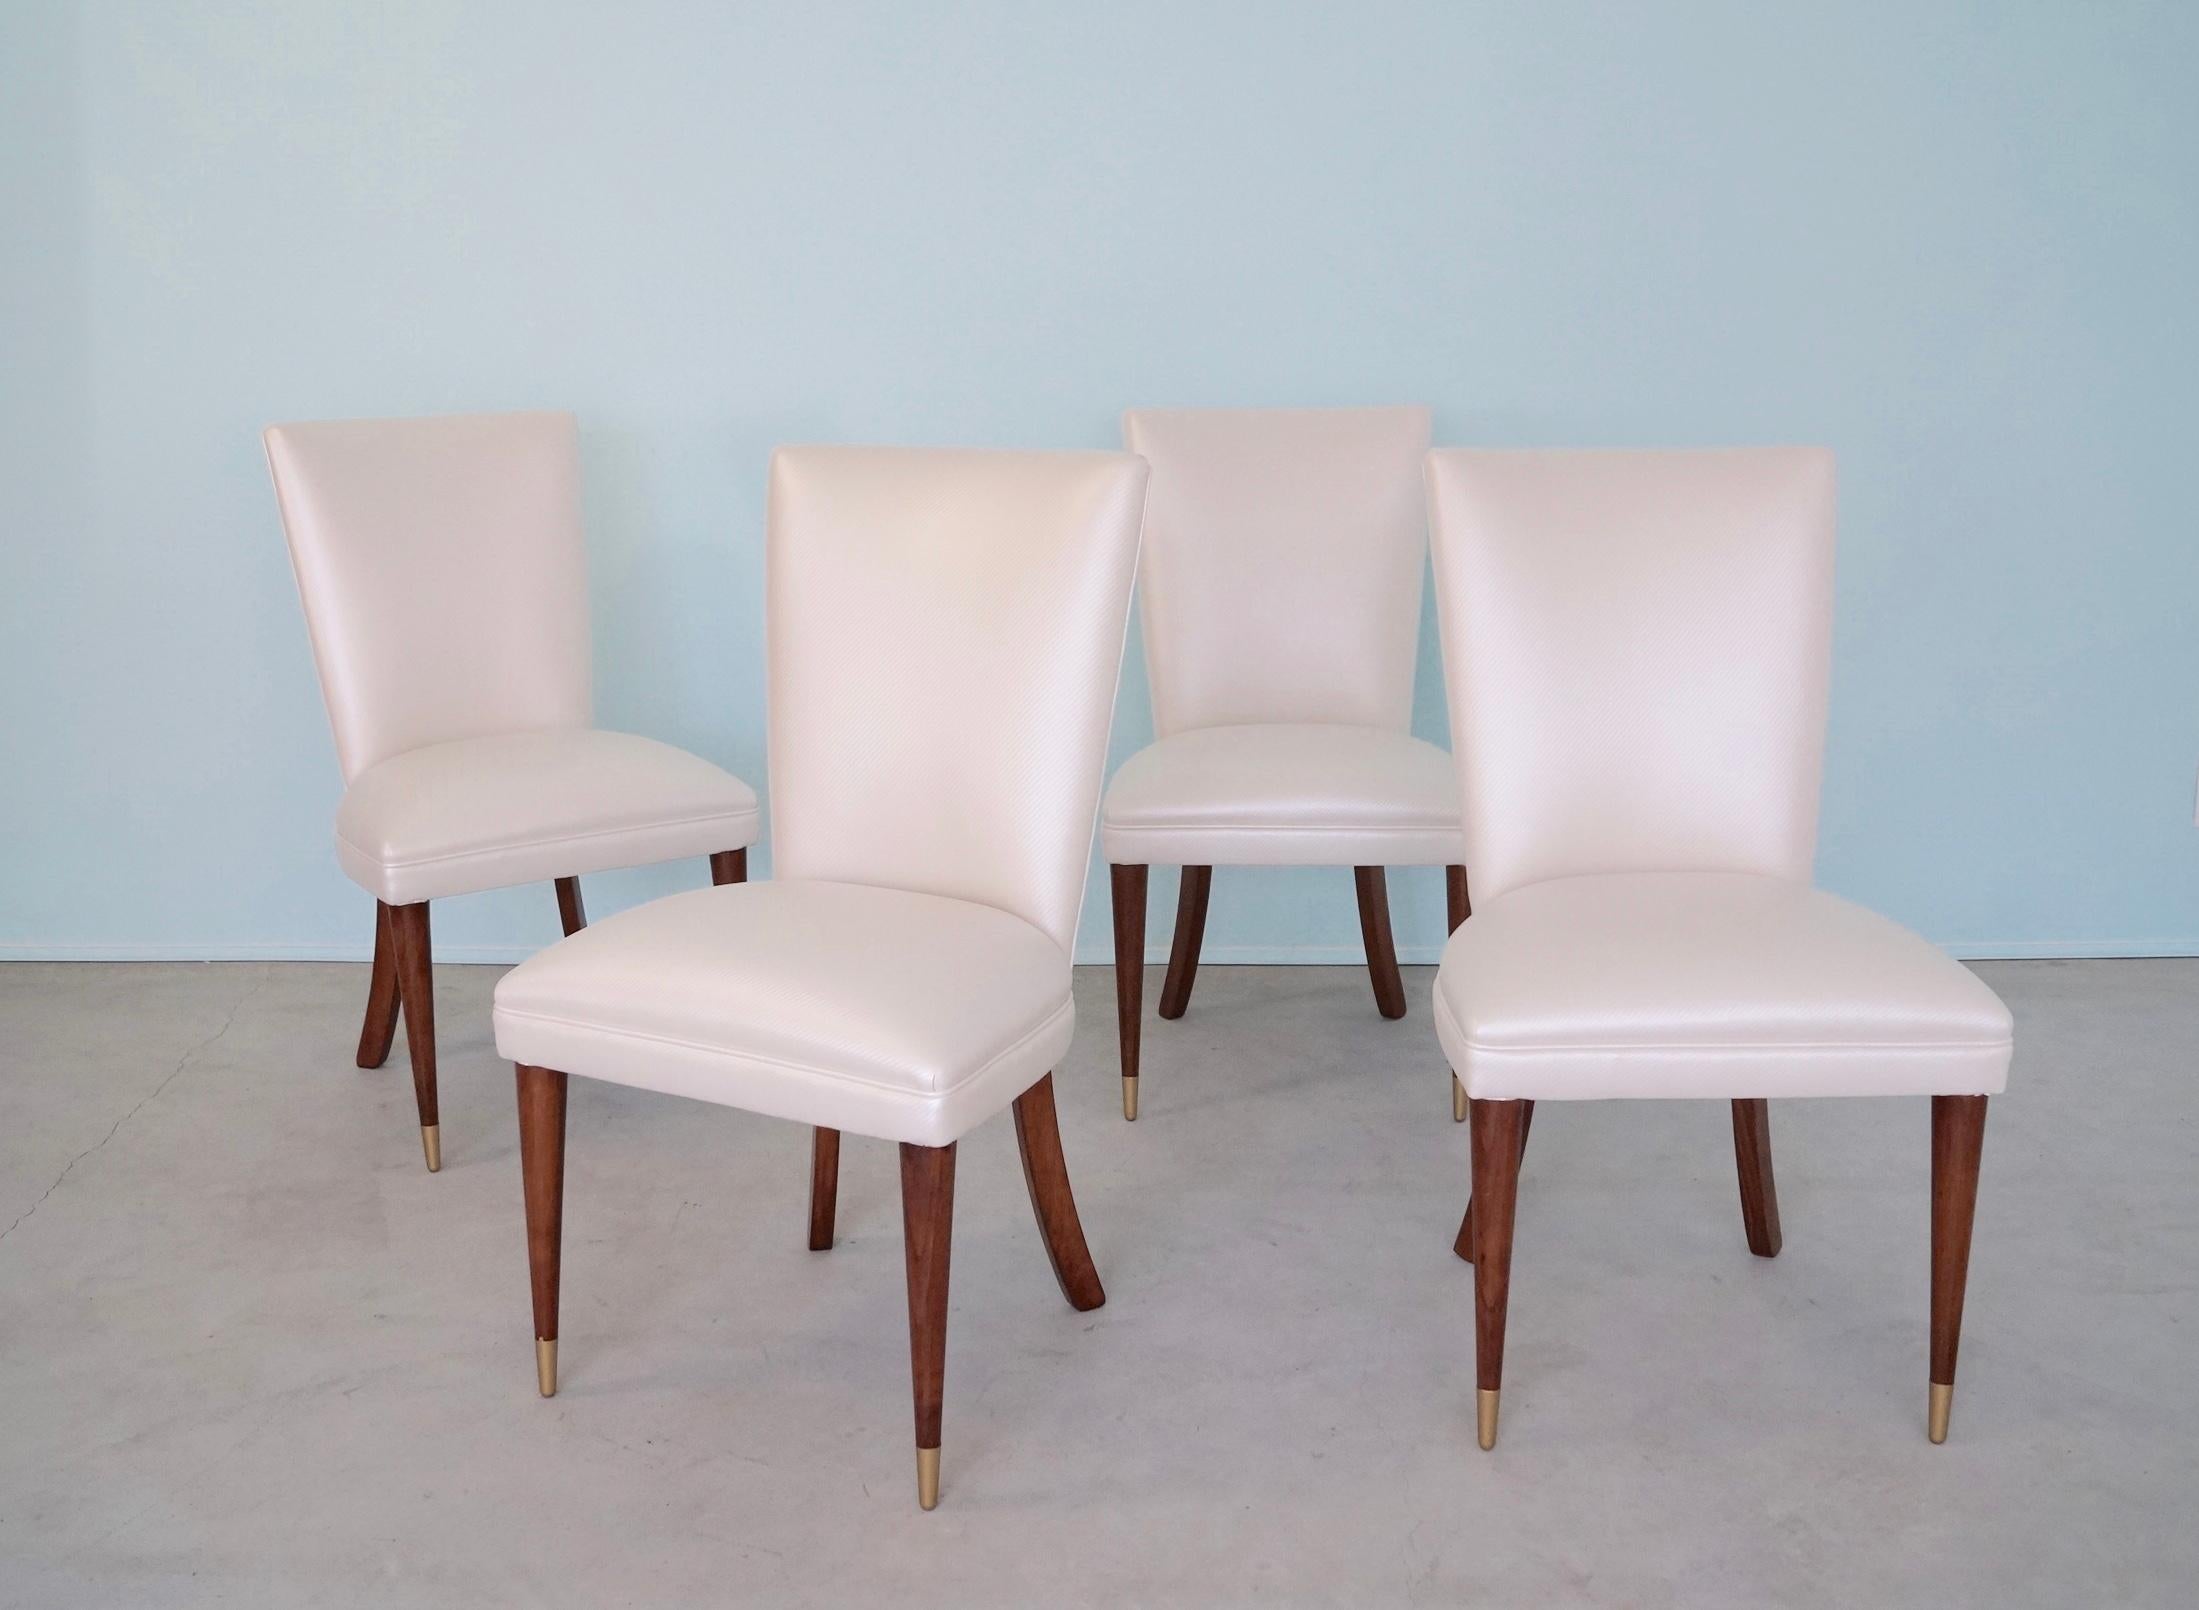 We have this incredible set of four original Mid-century Modern dining chairs for sale. They were manufactured in the 1950's, and are of exceptional quality and design. The chairs have springs, and the backrest has webbing. They are solid, and have